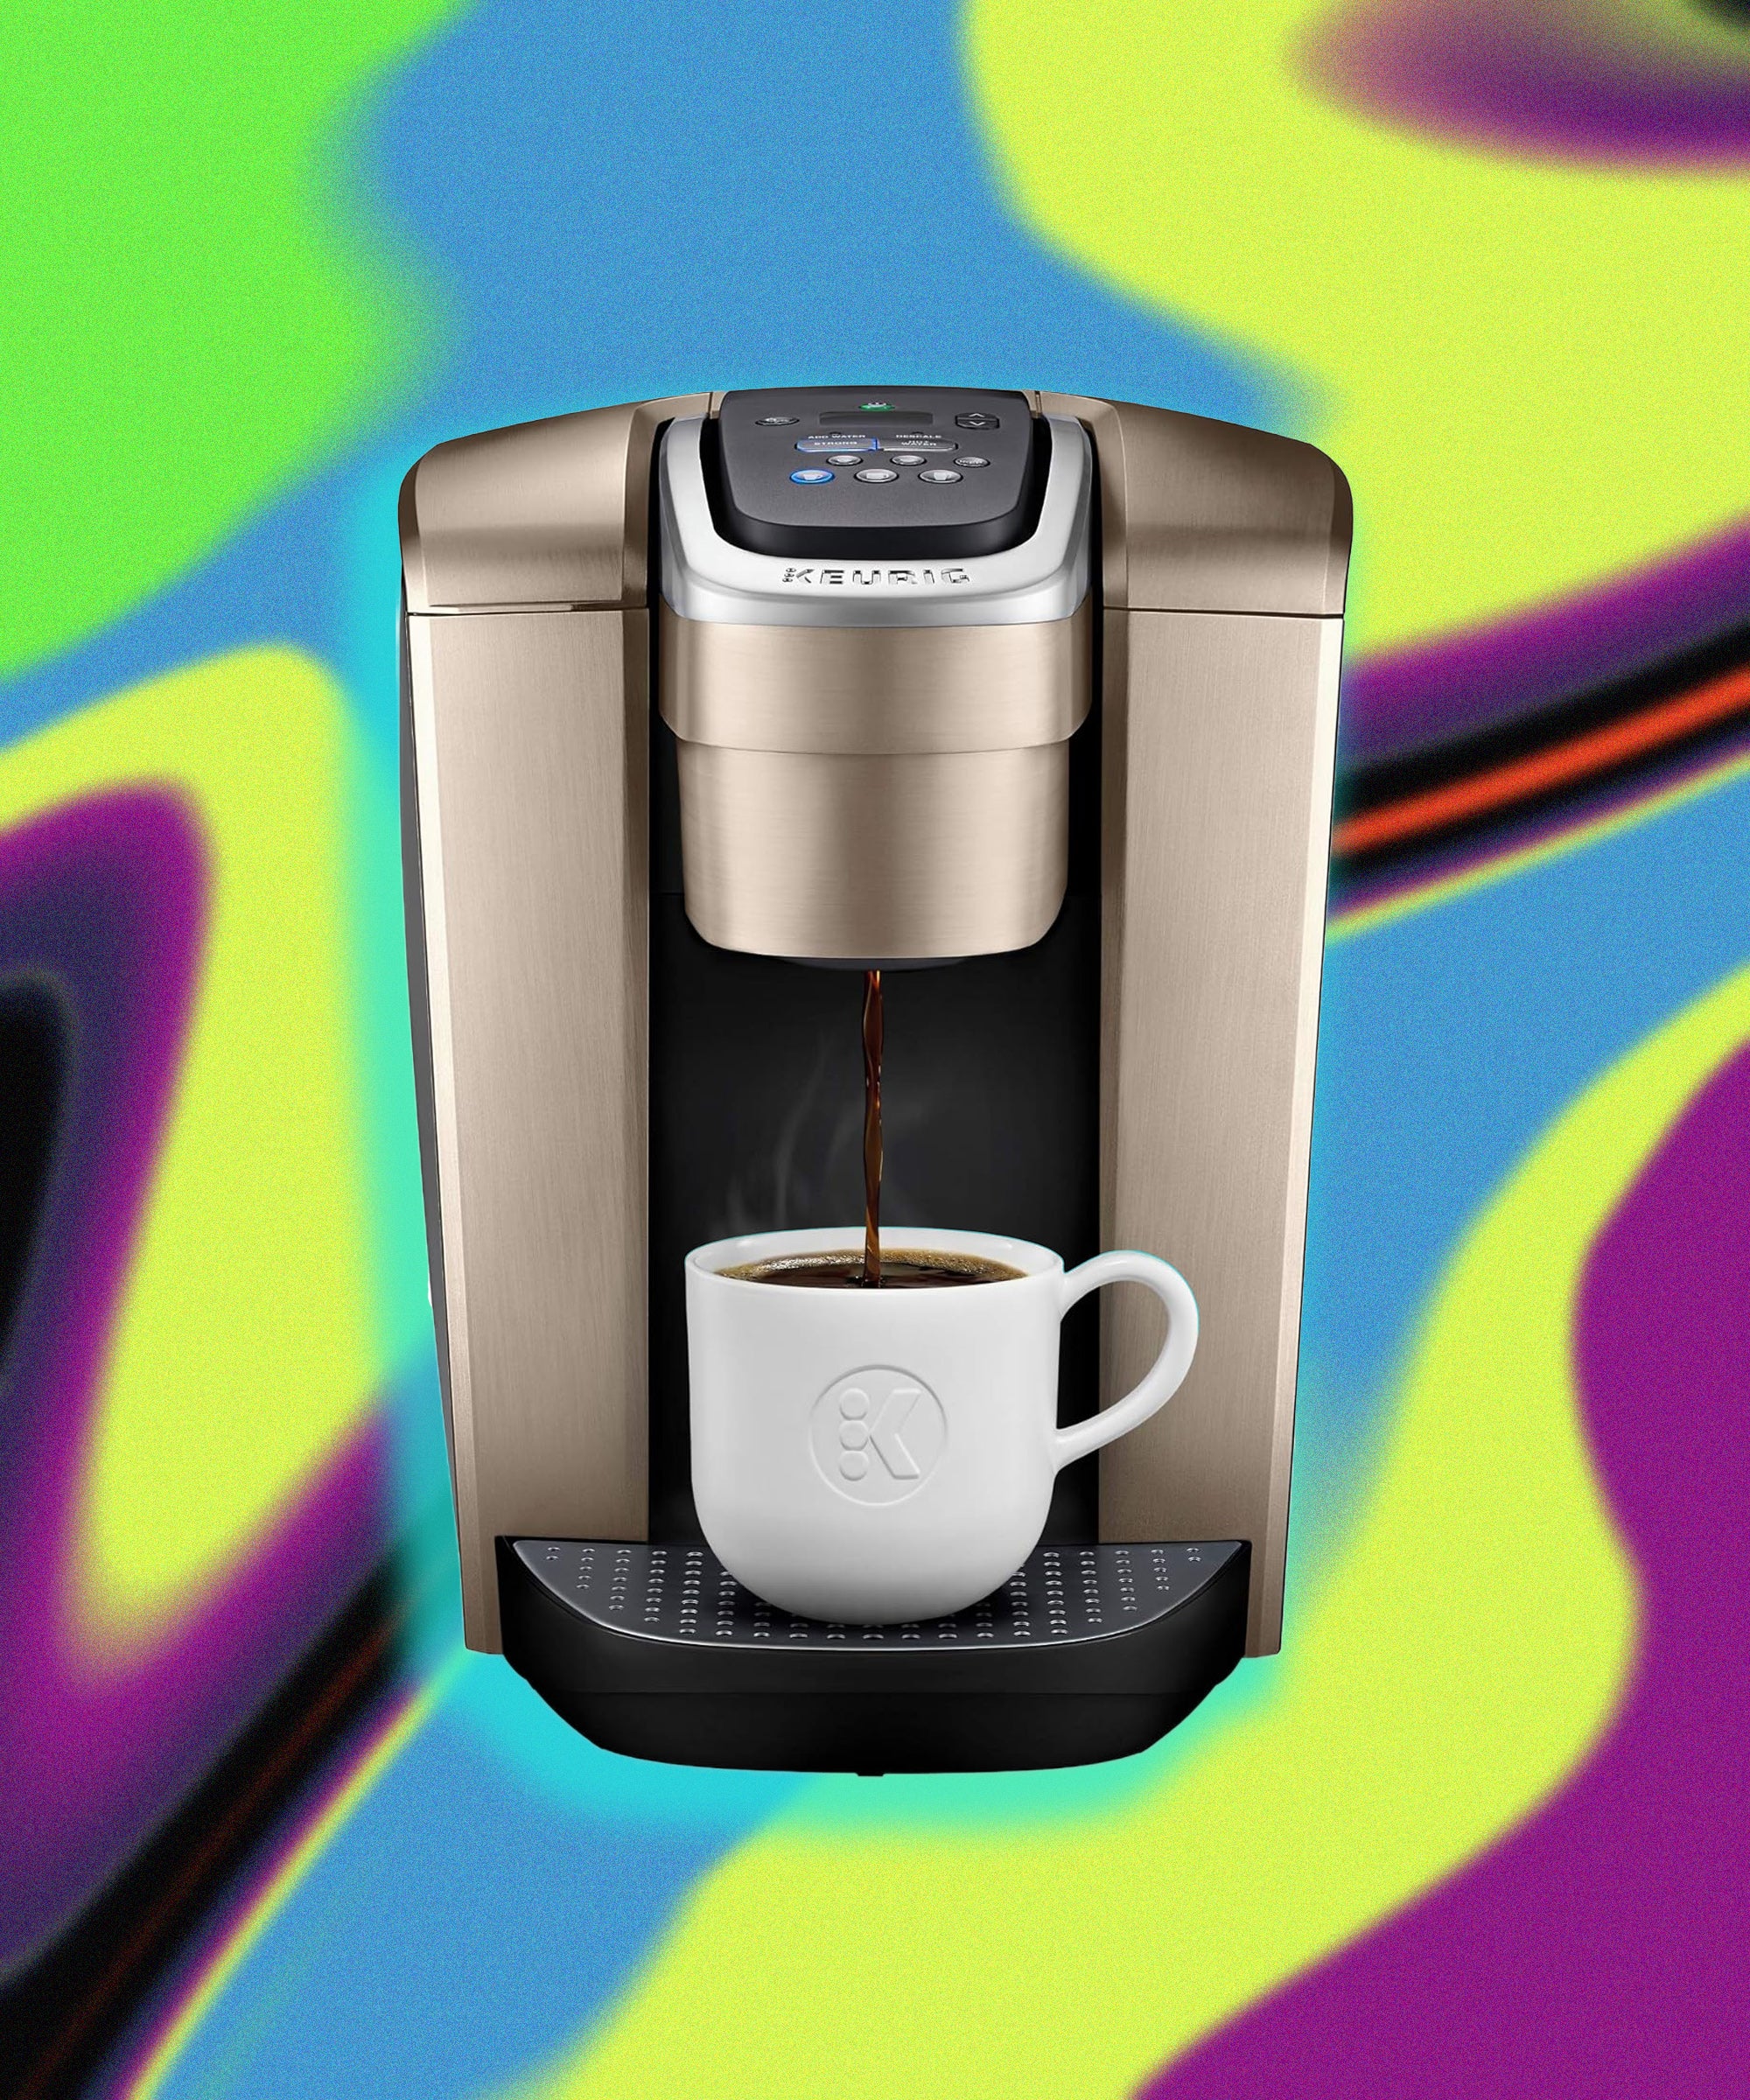 Gift Your Grad a New Pod Coffee Maker for Up to 31% Off Right Now